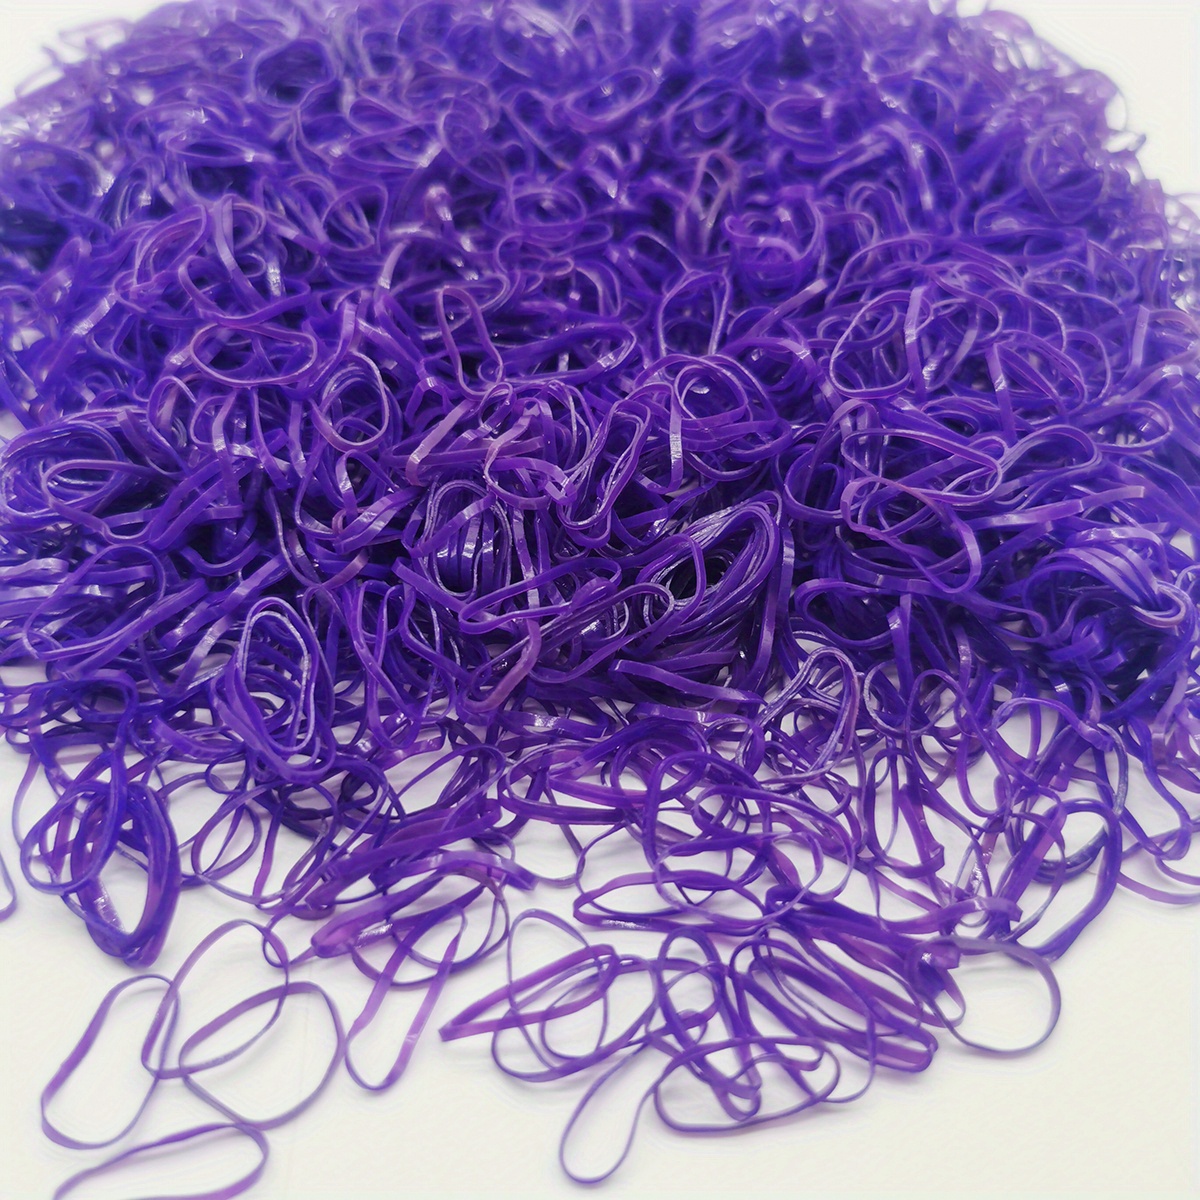 1000 Mini Rubber Bands Soft Elastic Bands for Kid Hair Braids Hair, Red, Free Returns & Free Ship, 0.99, Christmas Gifts,Temu